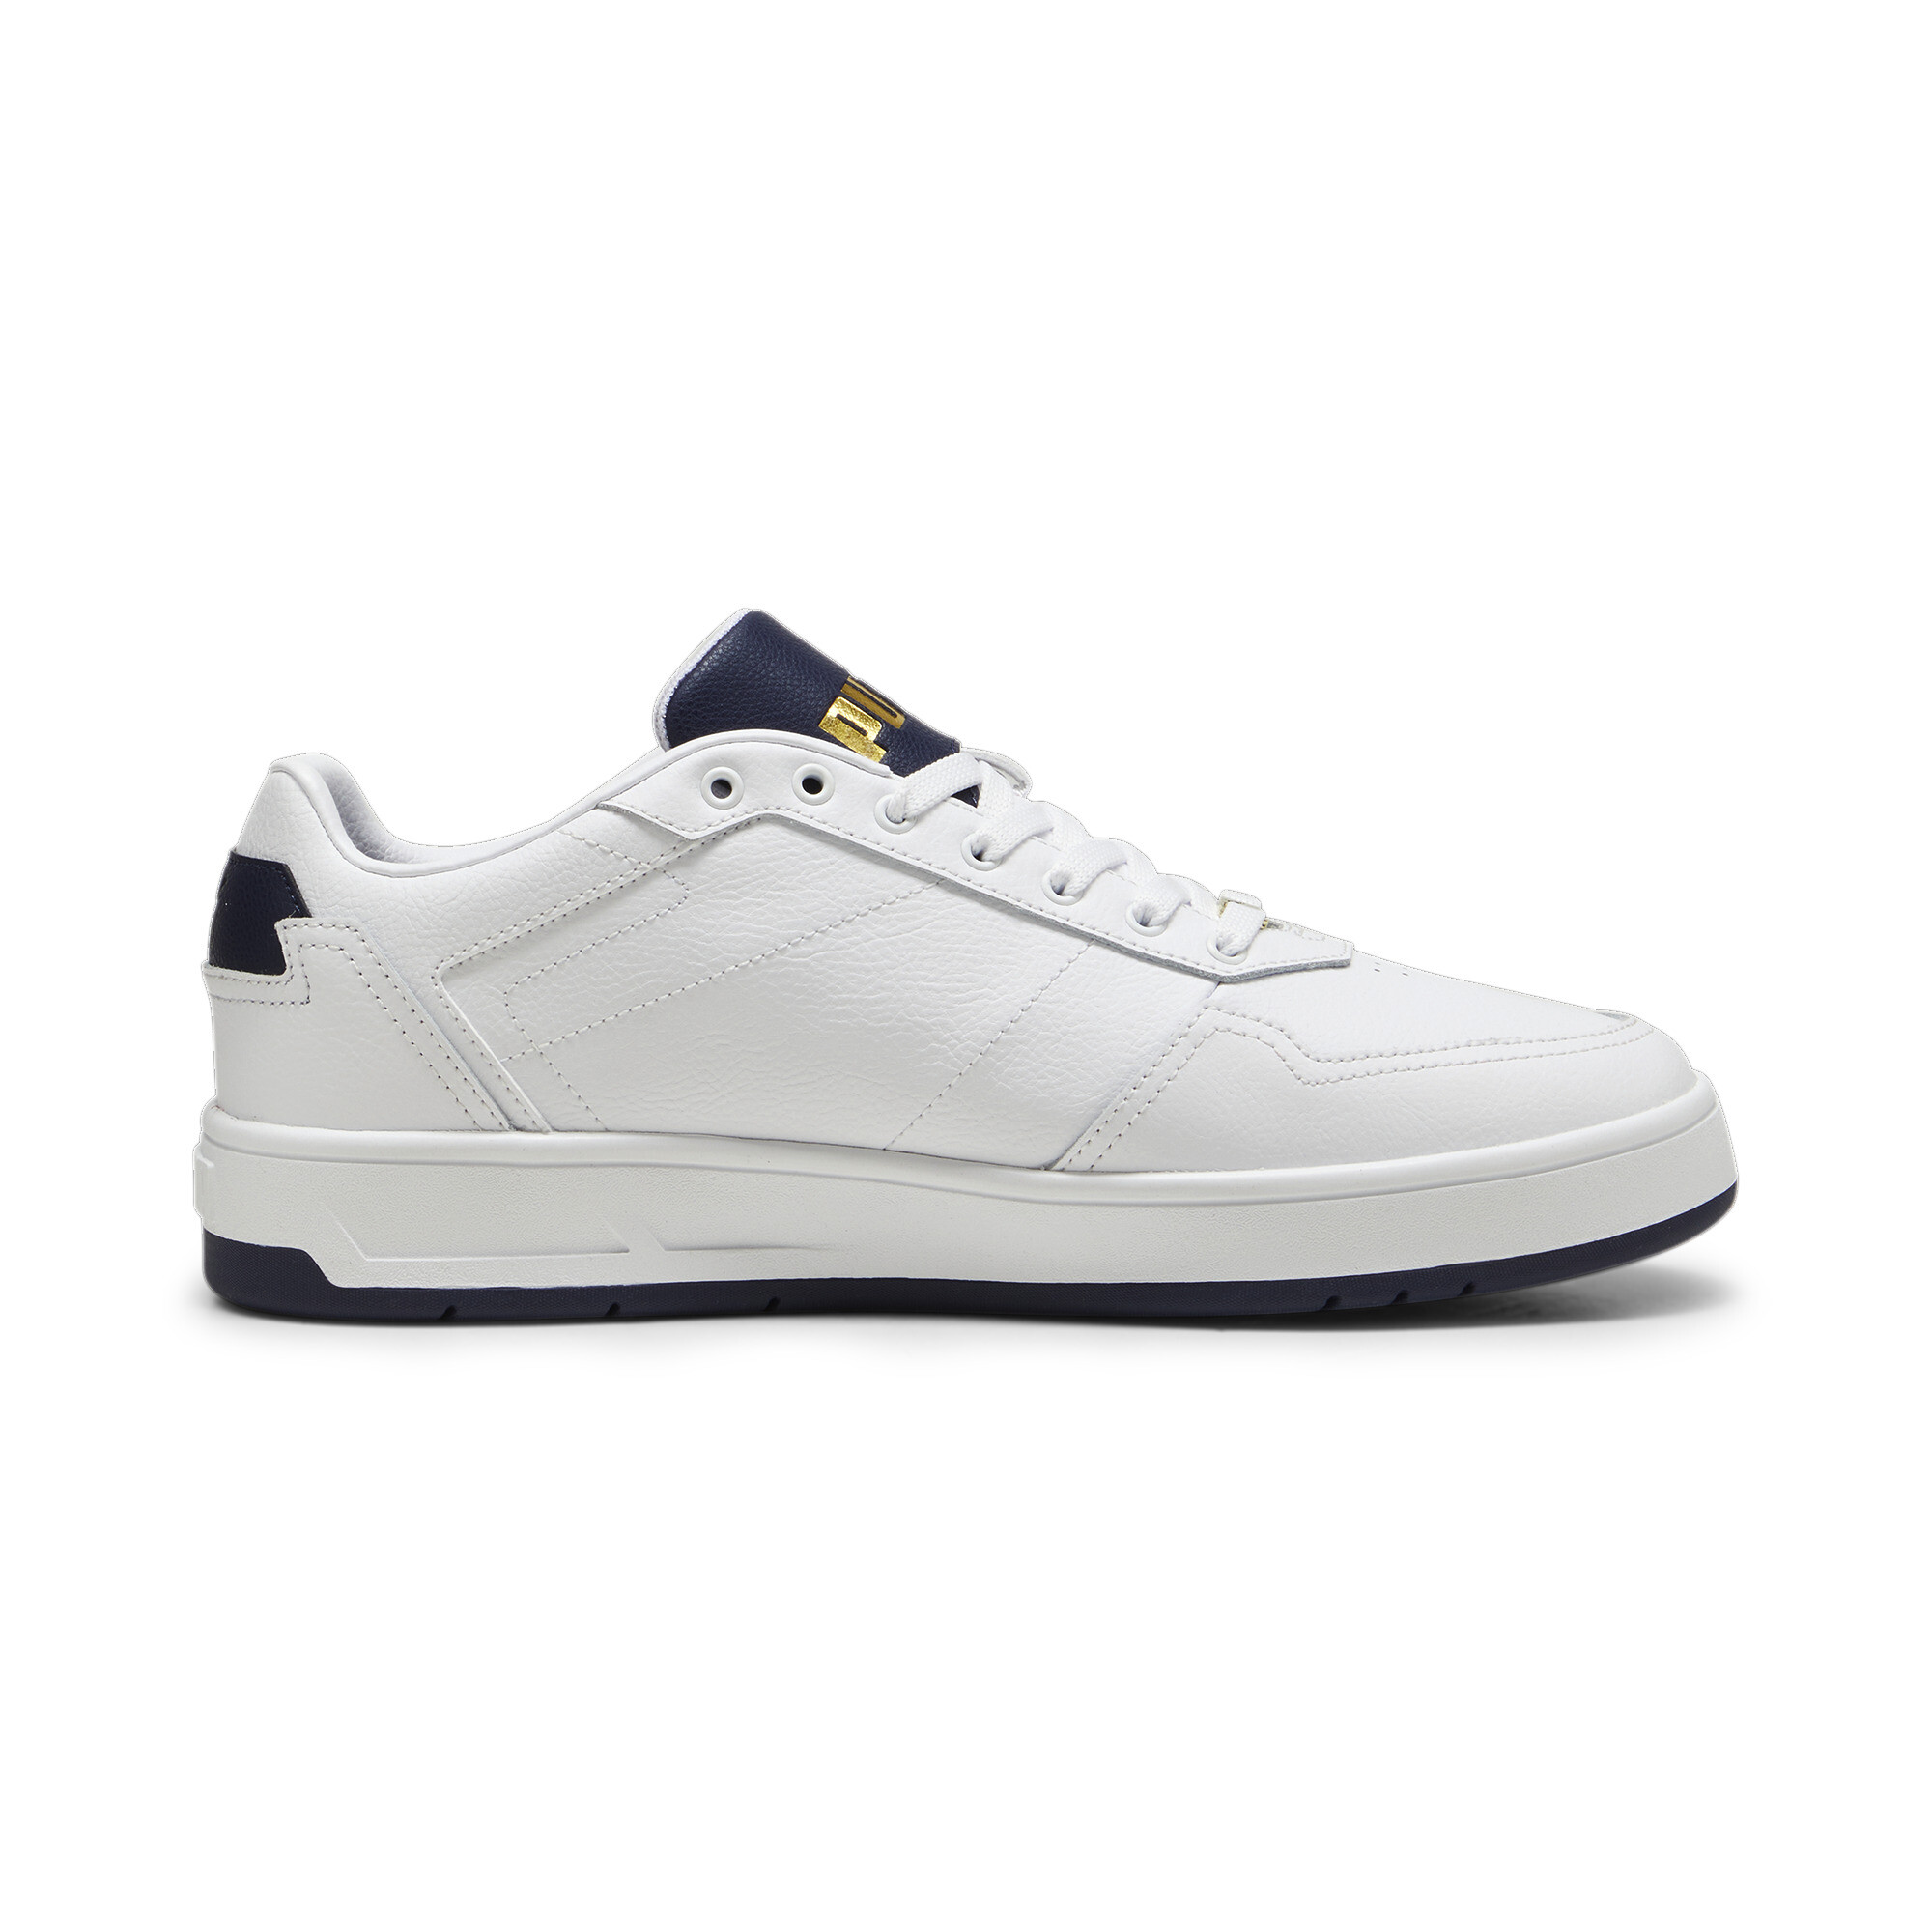 Puma Court Classic Lux Sneakers, White, Size 39, Shoes